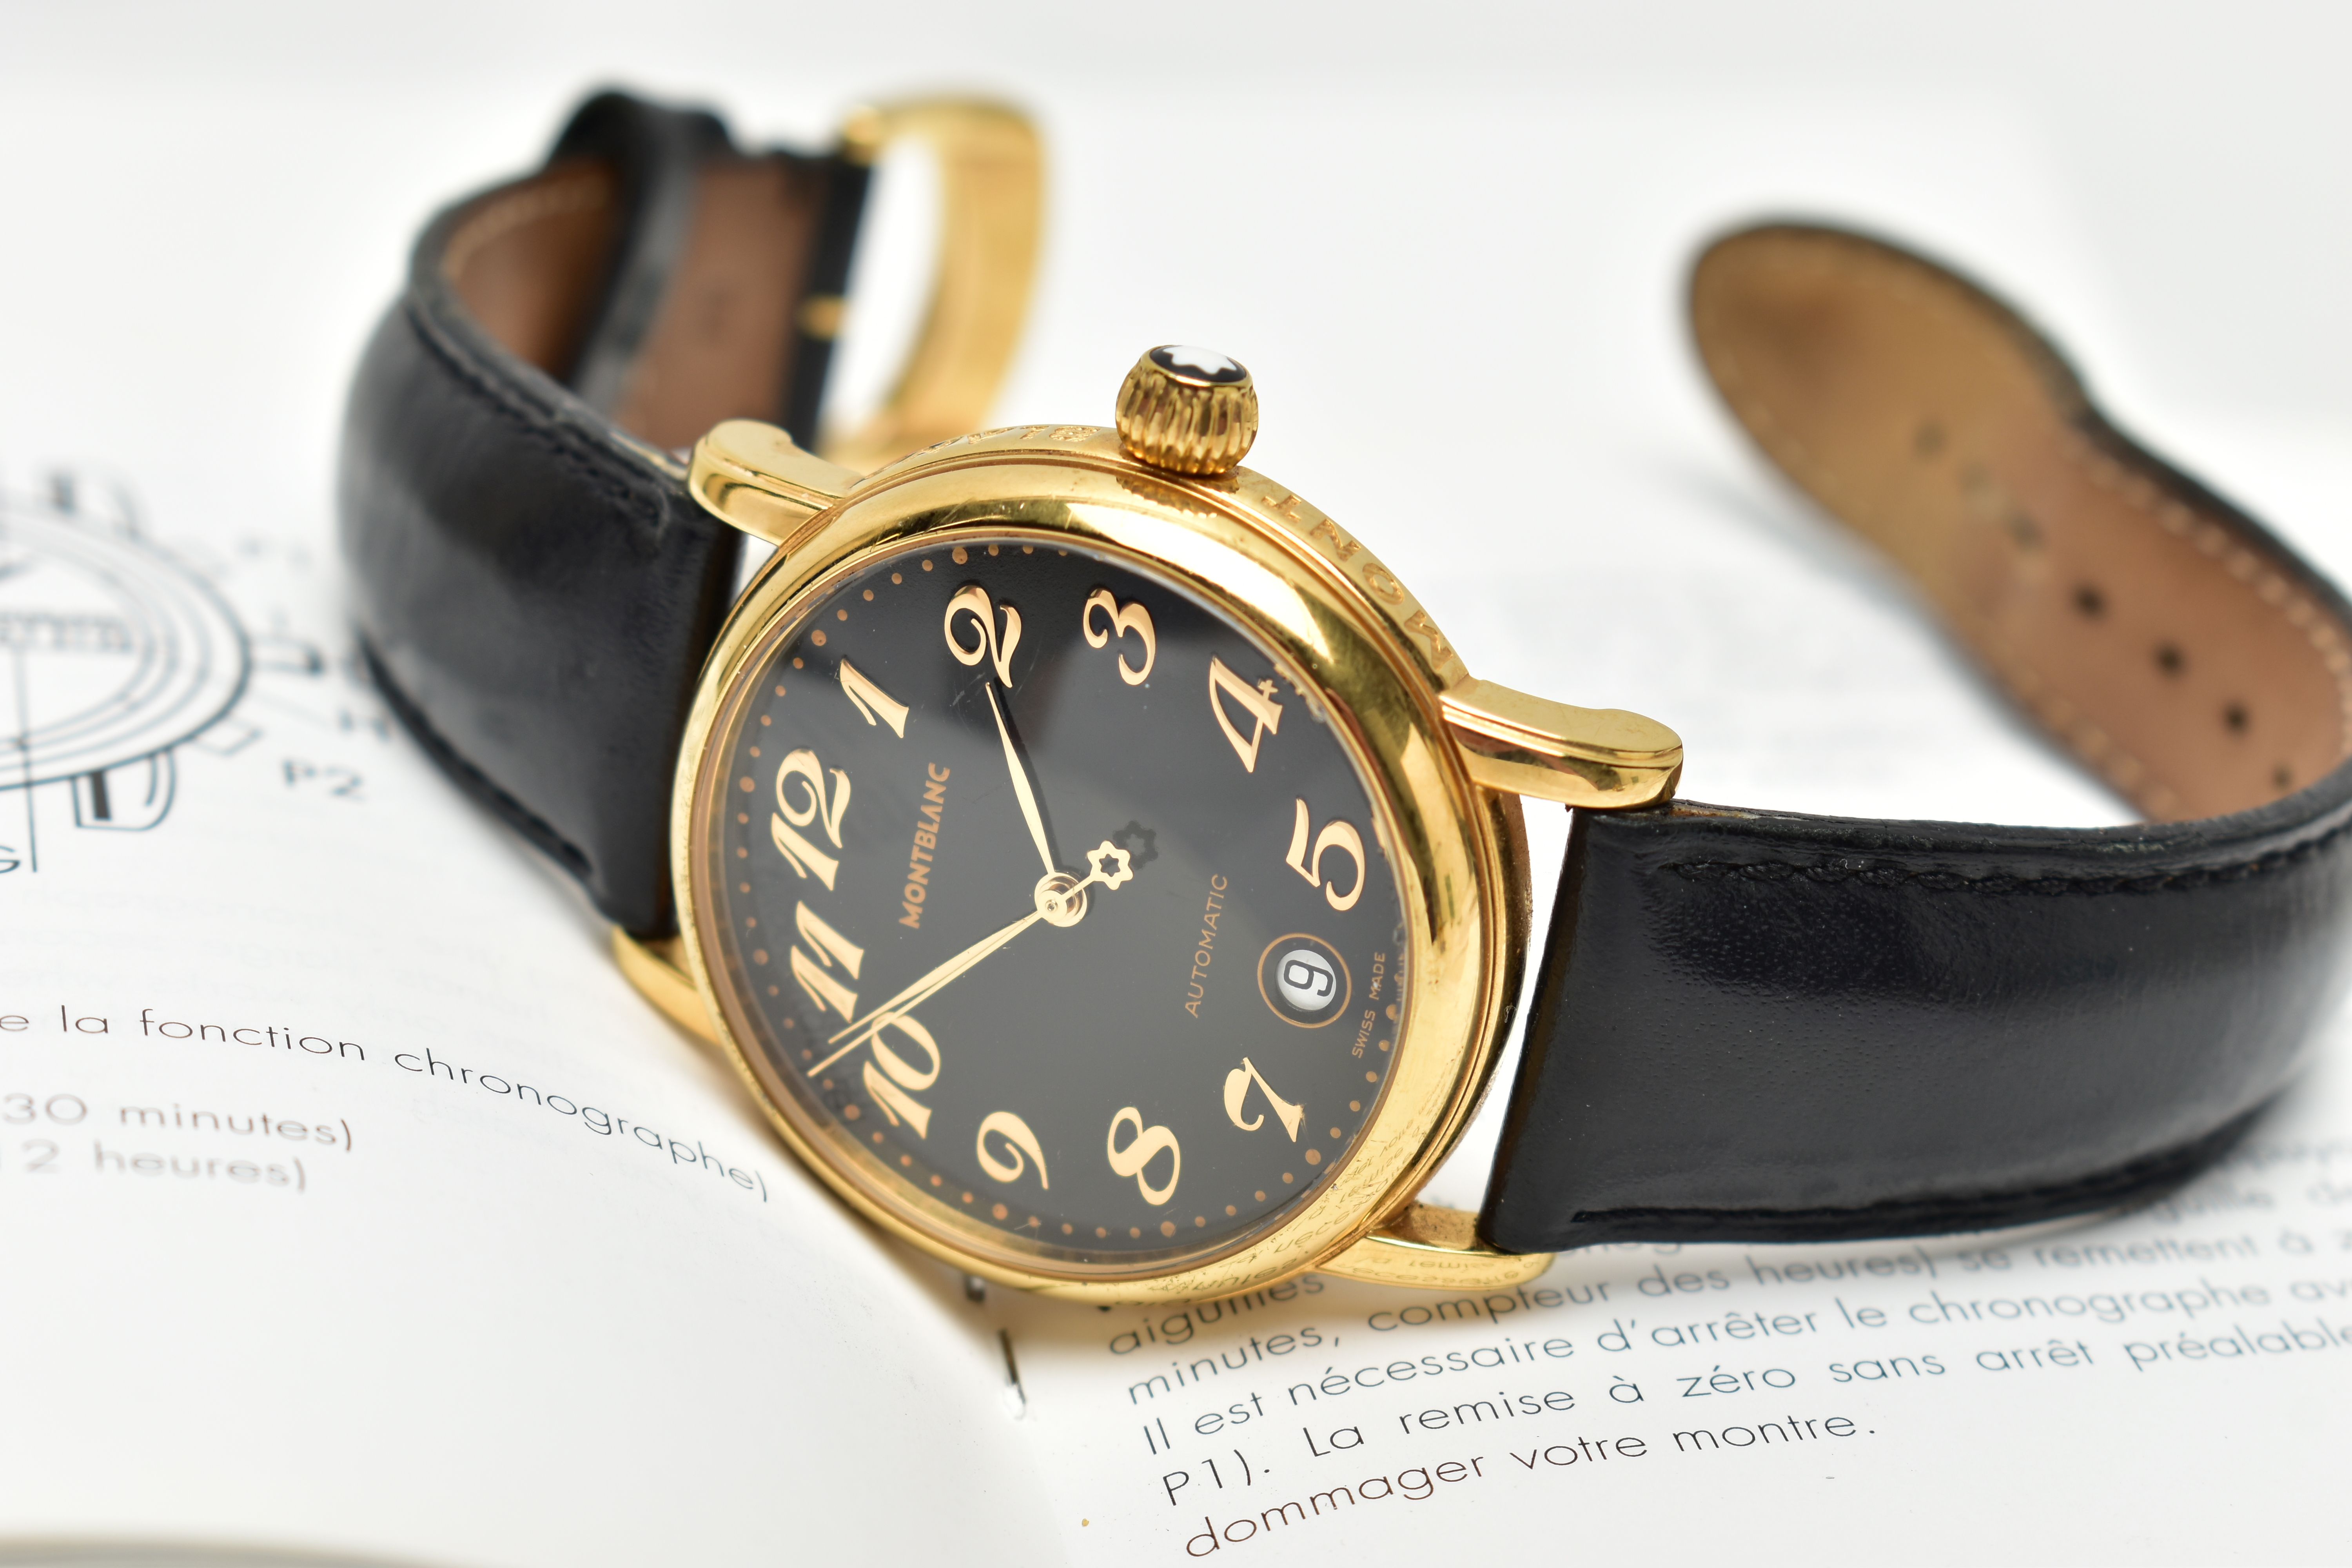 A GENTS 'MONTBLANC' WRISTWATCH, Automatic, round black dial signed 'Montblanc, Automatic', Arabic - Image 7 of 7